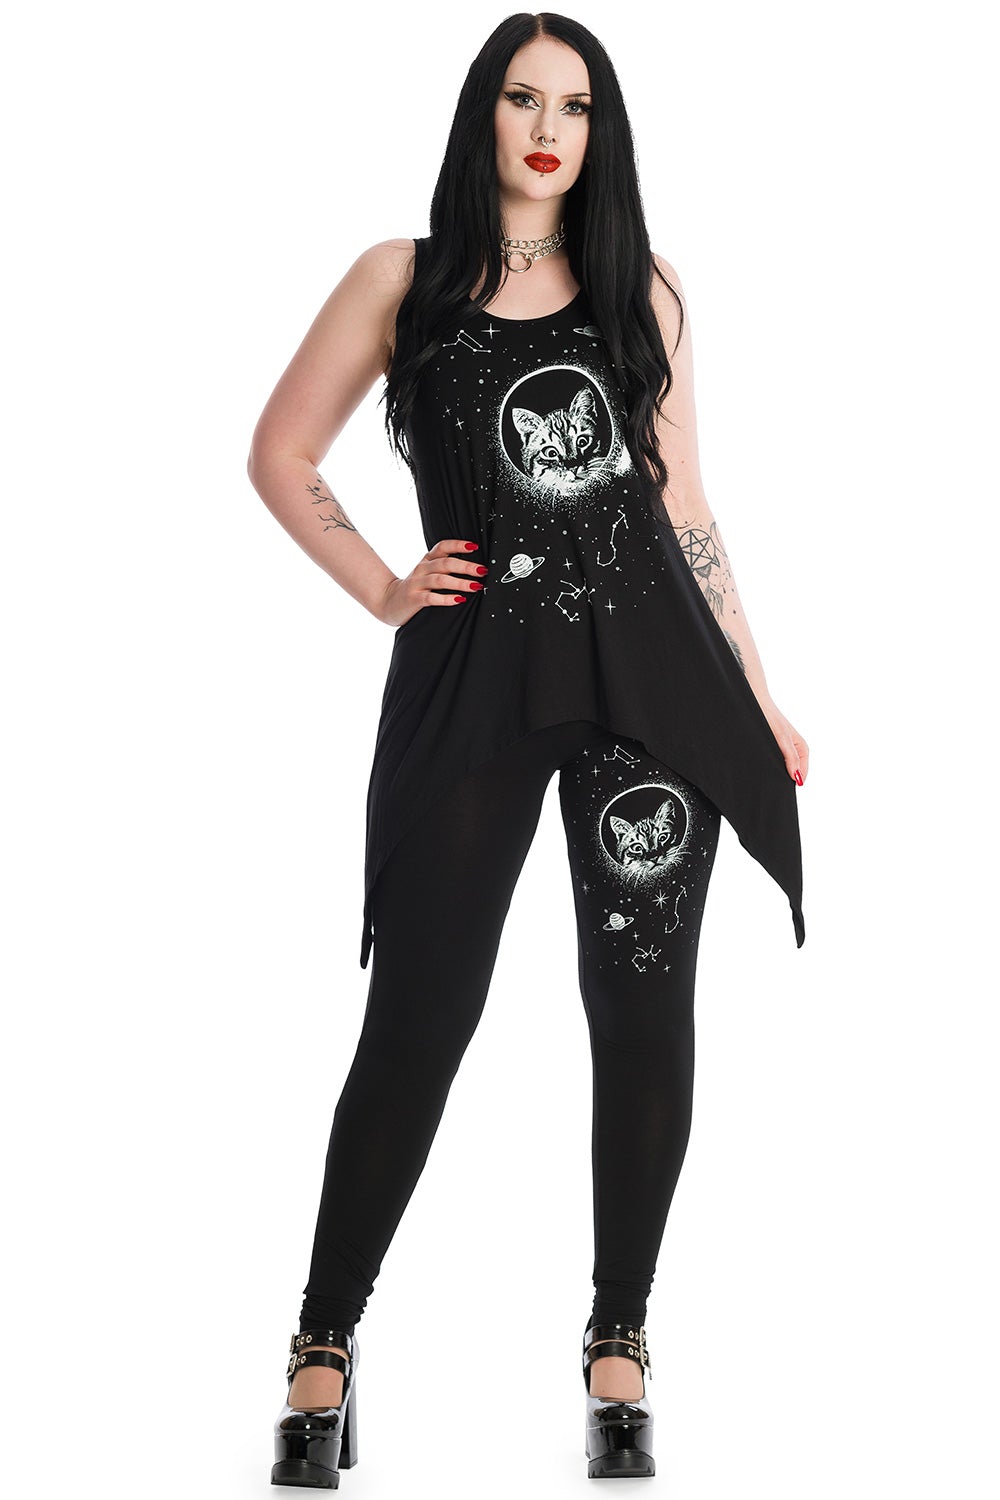 Alternative model wearing long line black vest top with space print and cat feature on the front. Model is wearing matching leggings.